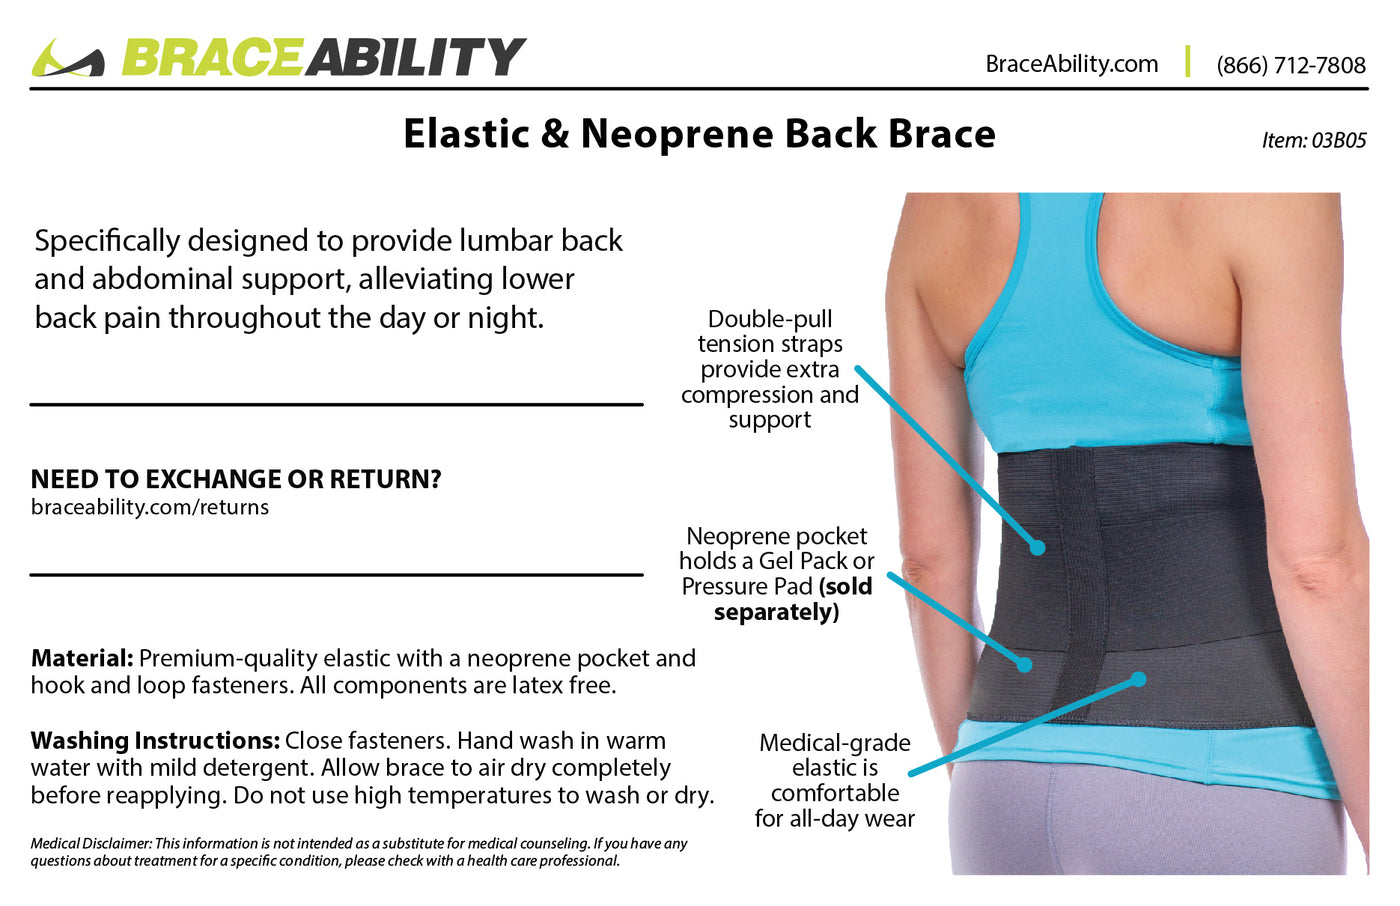 to clean the elastic and neoprene back brace, hand wash with mild laundry detergent and allow it to air dry completely